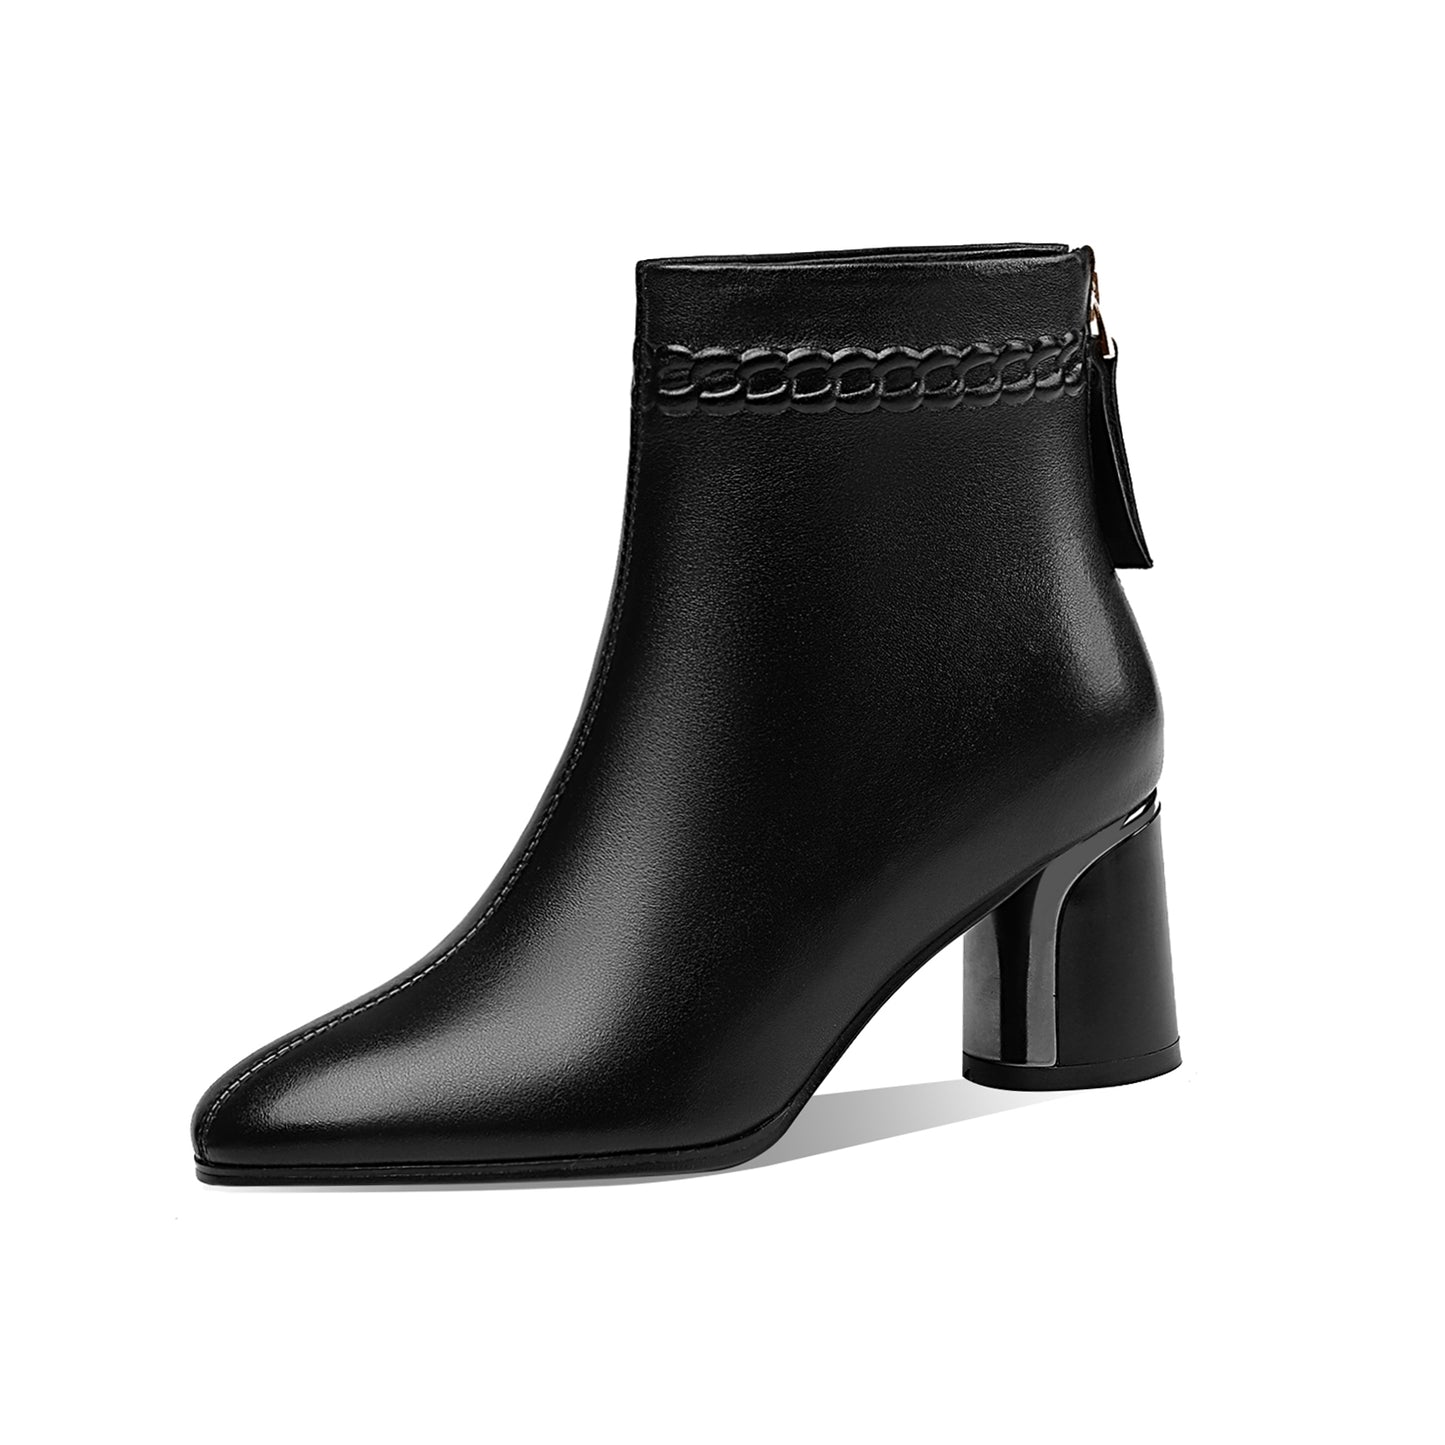 TinaCus Handmade Women's Genuine Leather Pointed Toe Back Zipper Mid Chunky Heel Ankle Boots